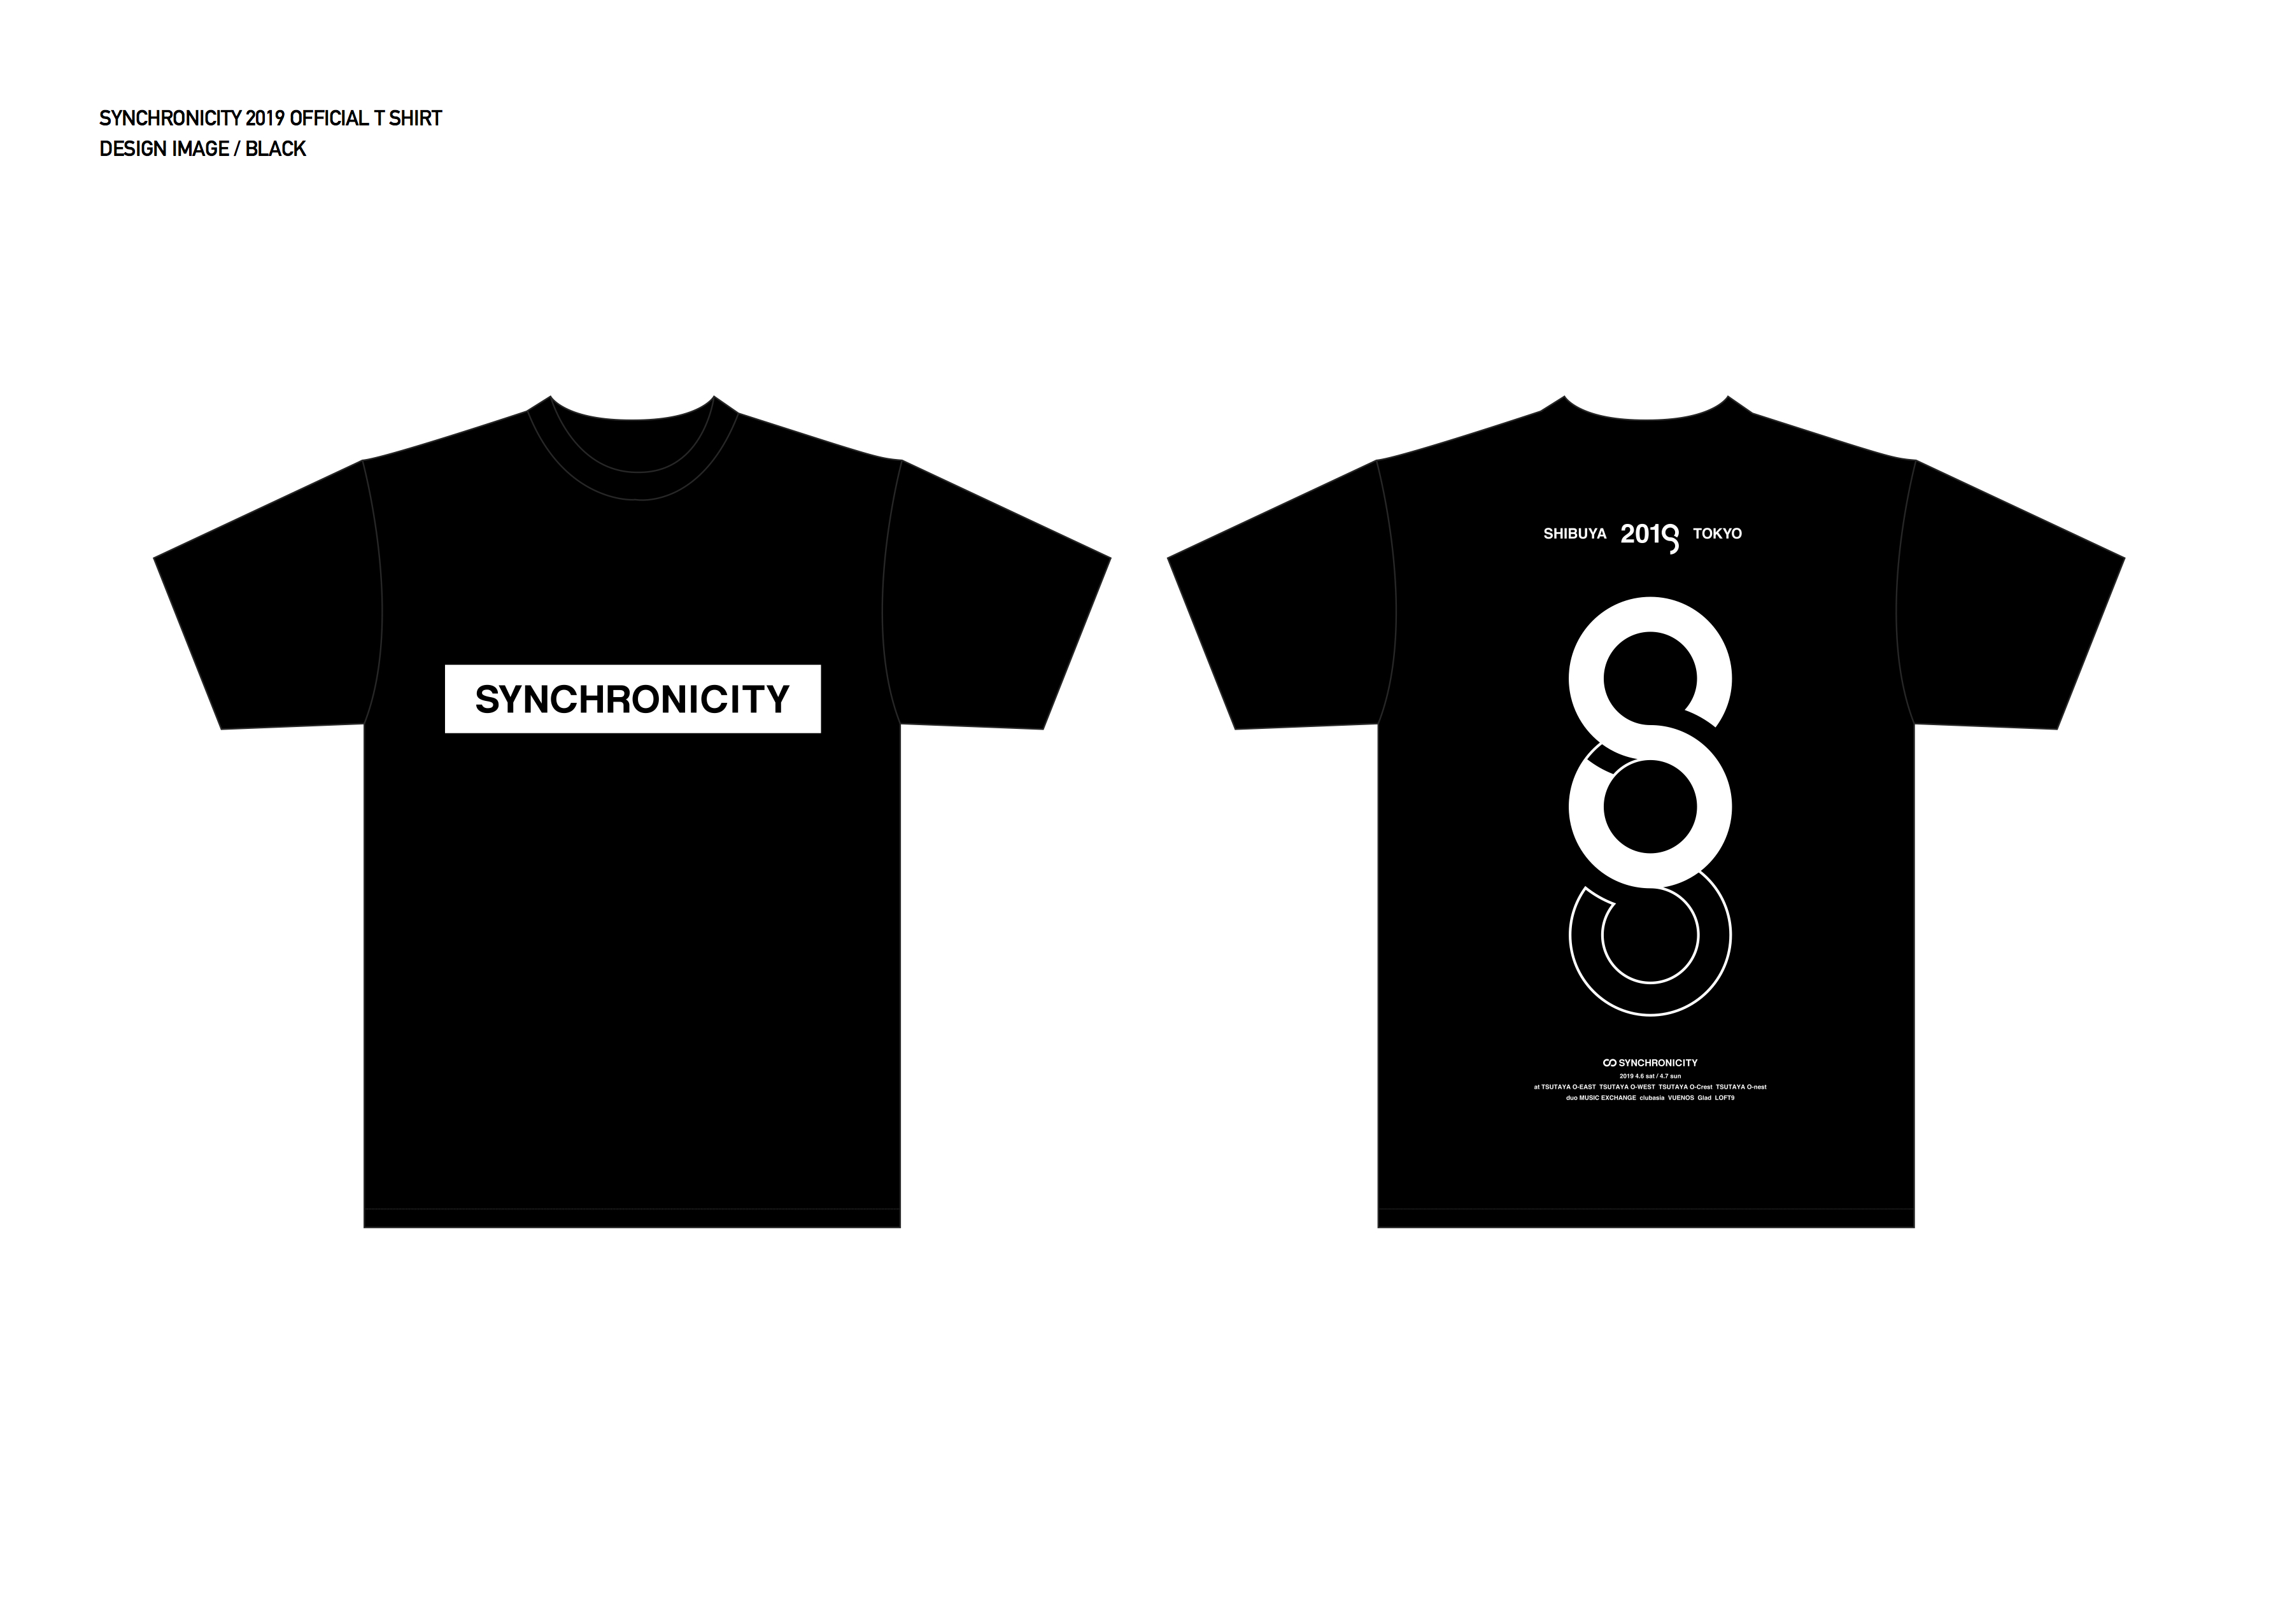 synchronicity-2019-tee_official-image_black